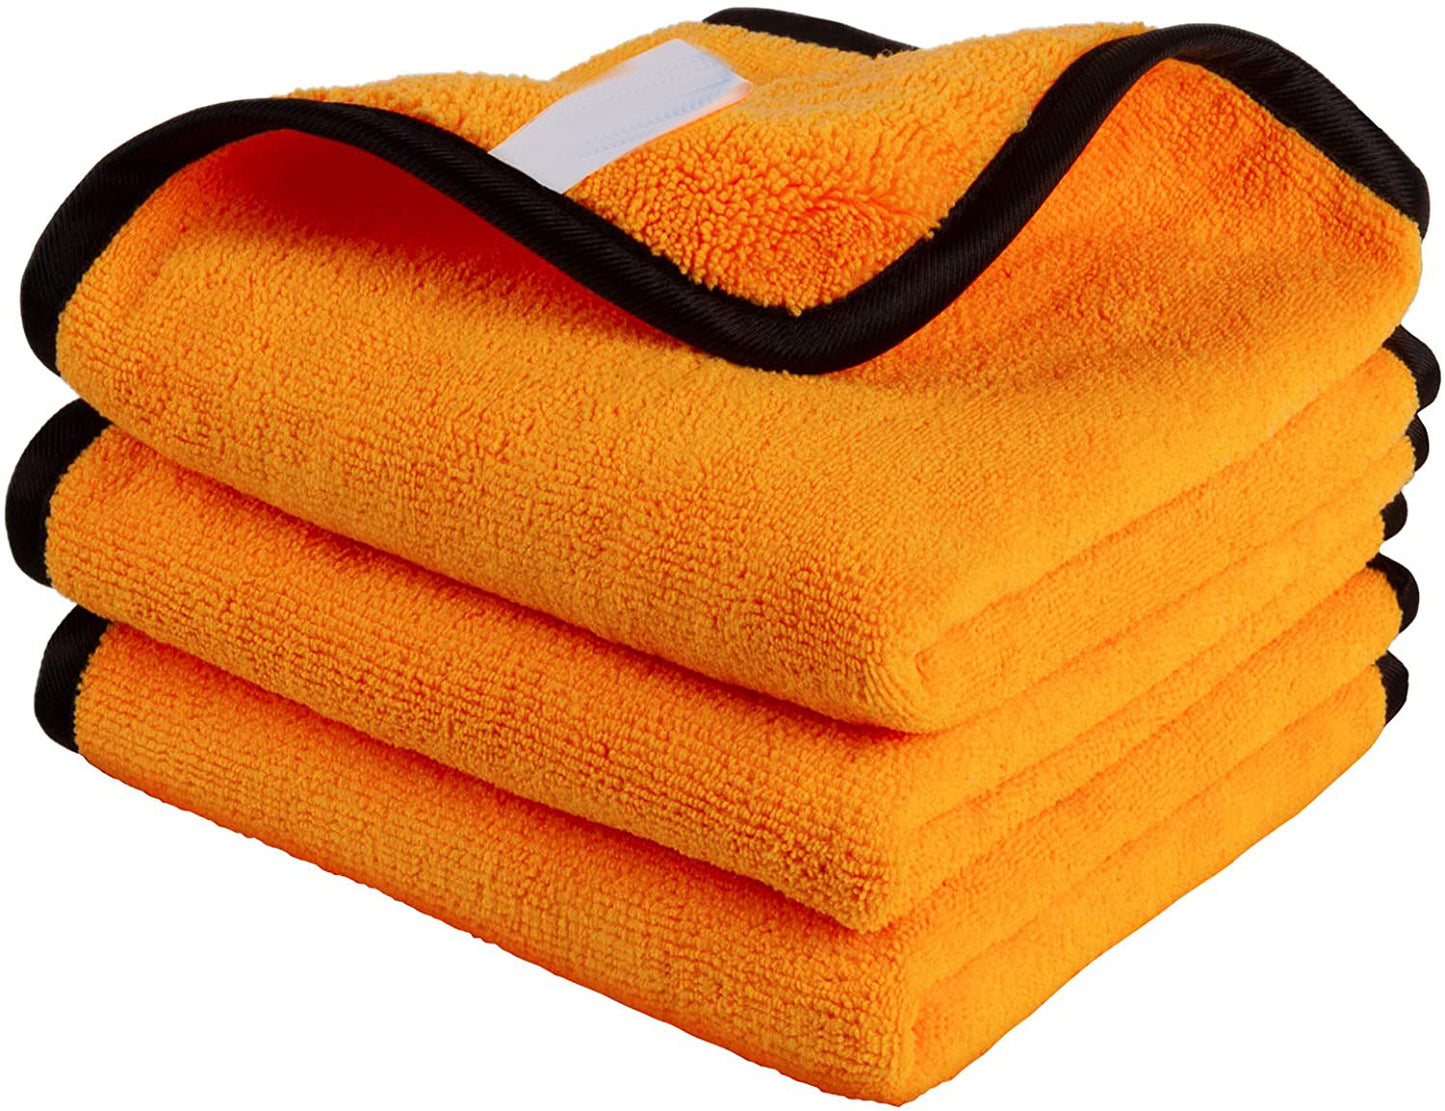 3PCS Thick Plush Super Absorbent Car Wash Towel Cloth Car Cleaning Towels Drying